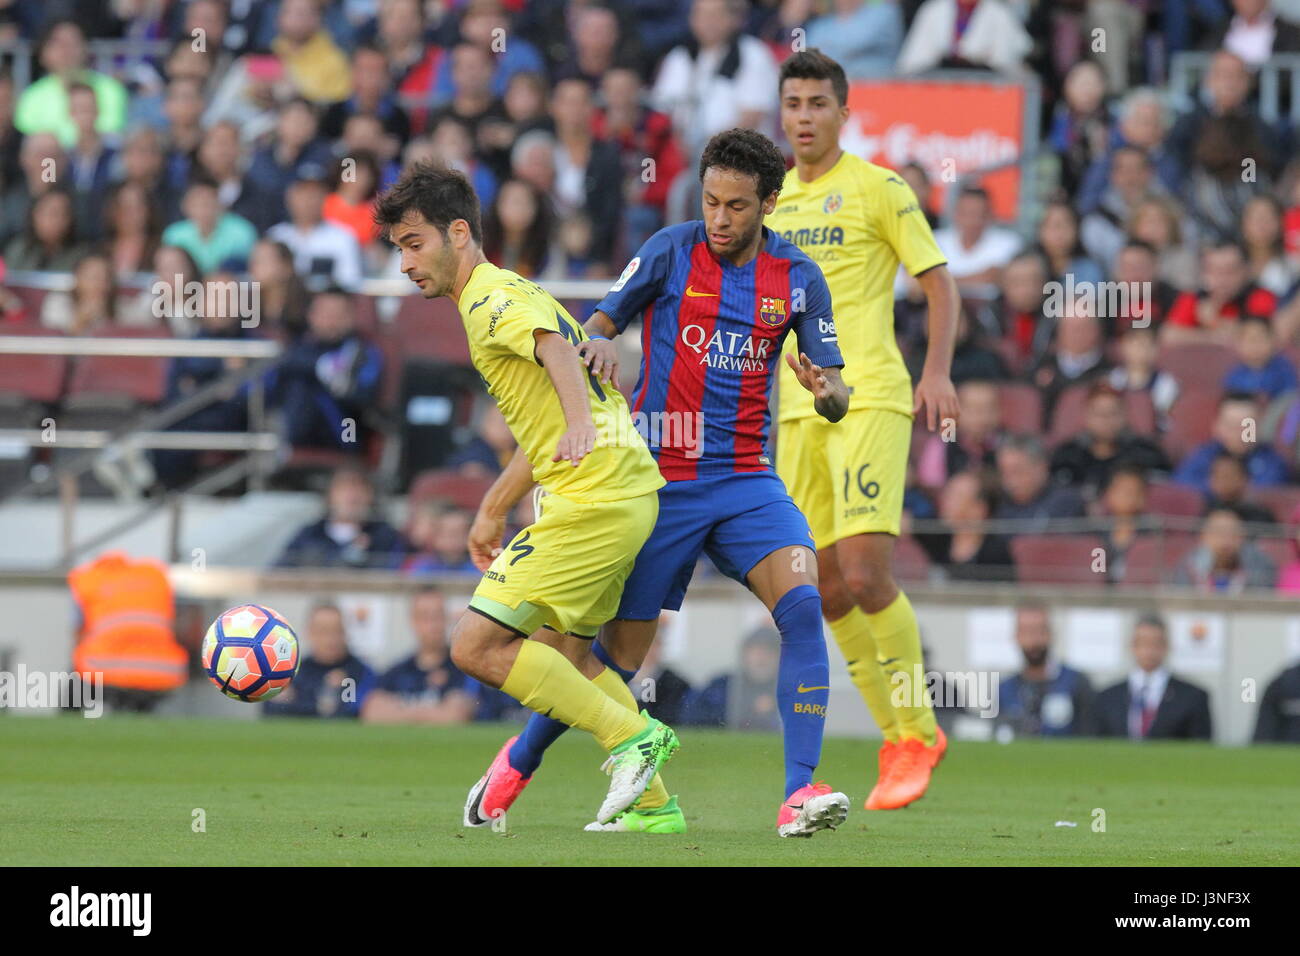 Barcelona, Spain. 06th May, 2017. 06.05.2017 Barcelona. La Liga game 31. picture show Neymar in action during game between FC Barcelona against Villarreal at Camp Nou Credit: Gtres Información más Comuniación on line, S.L./Alamy Live News Stock Photo